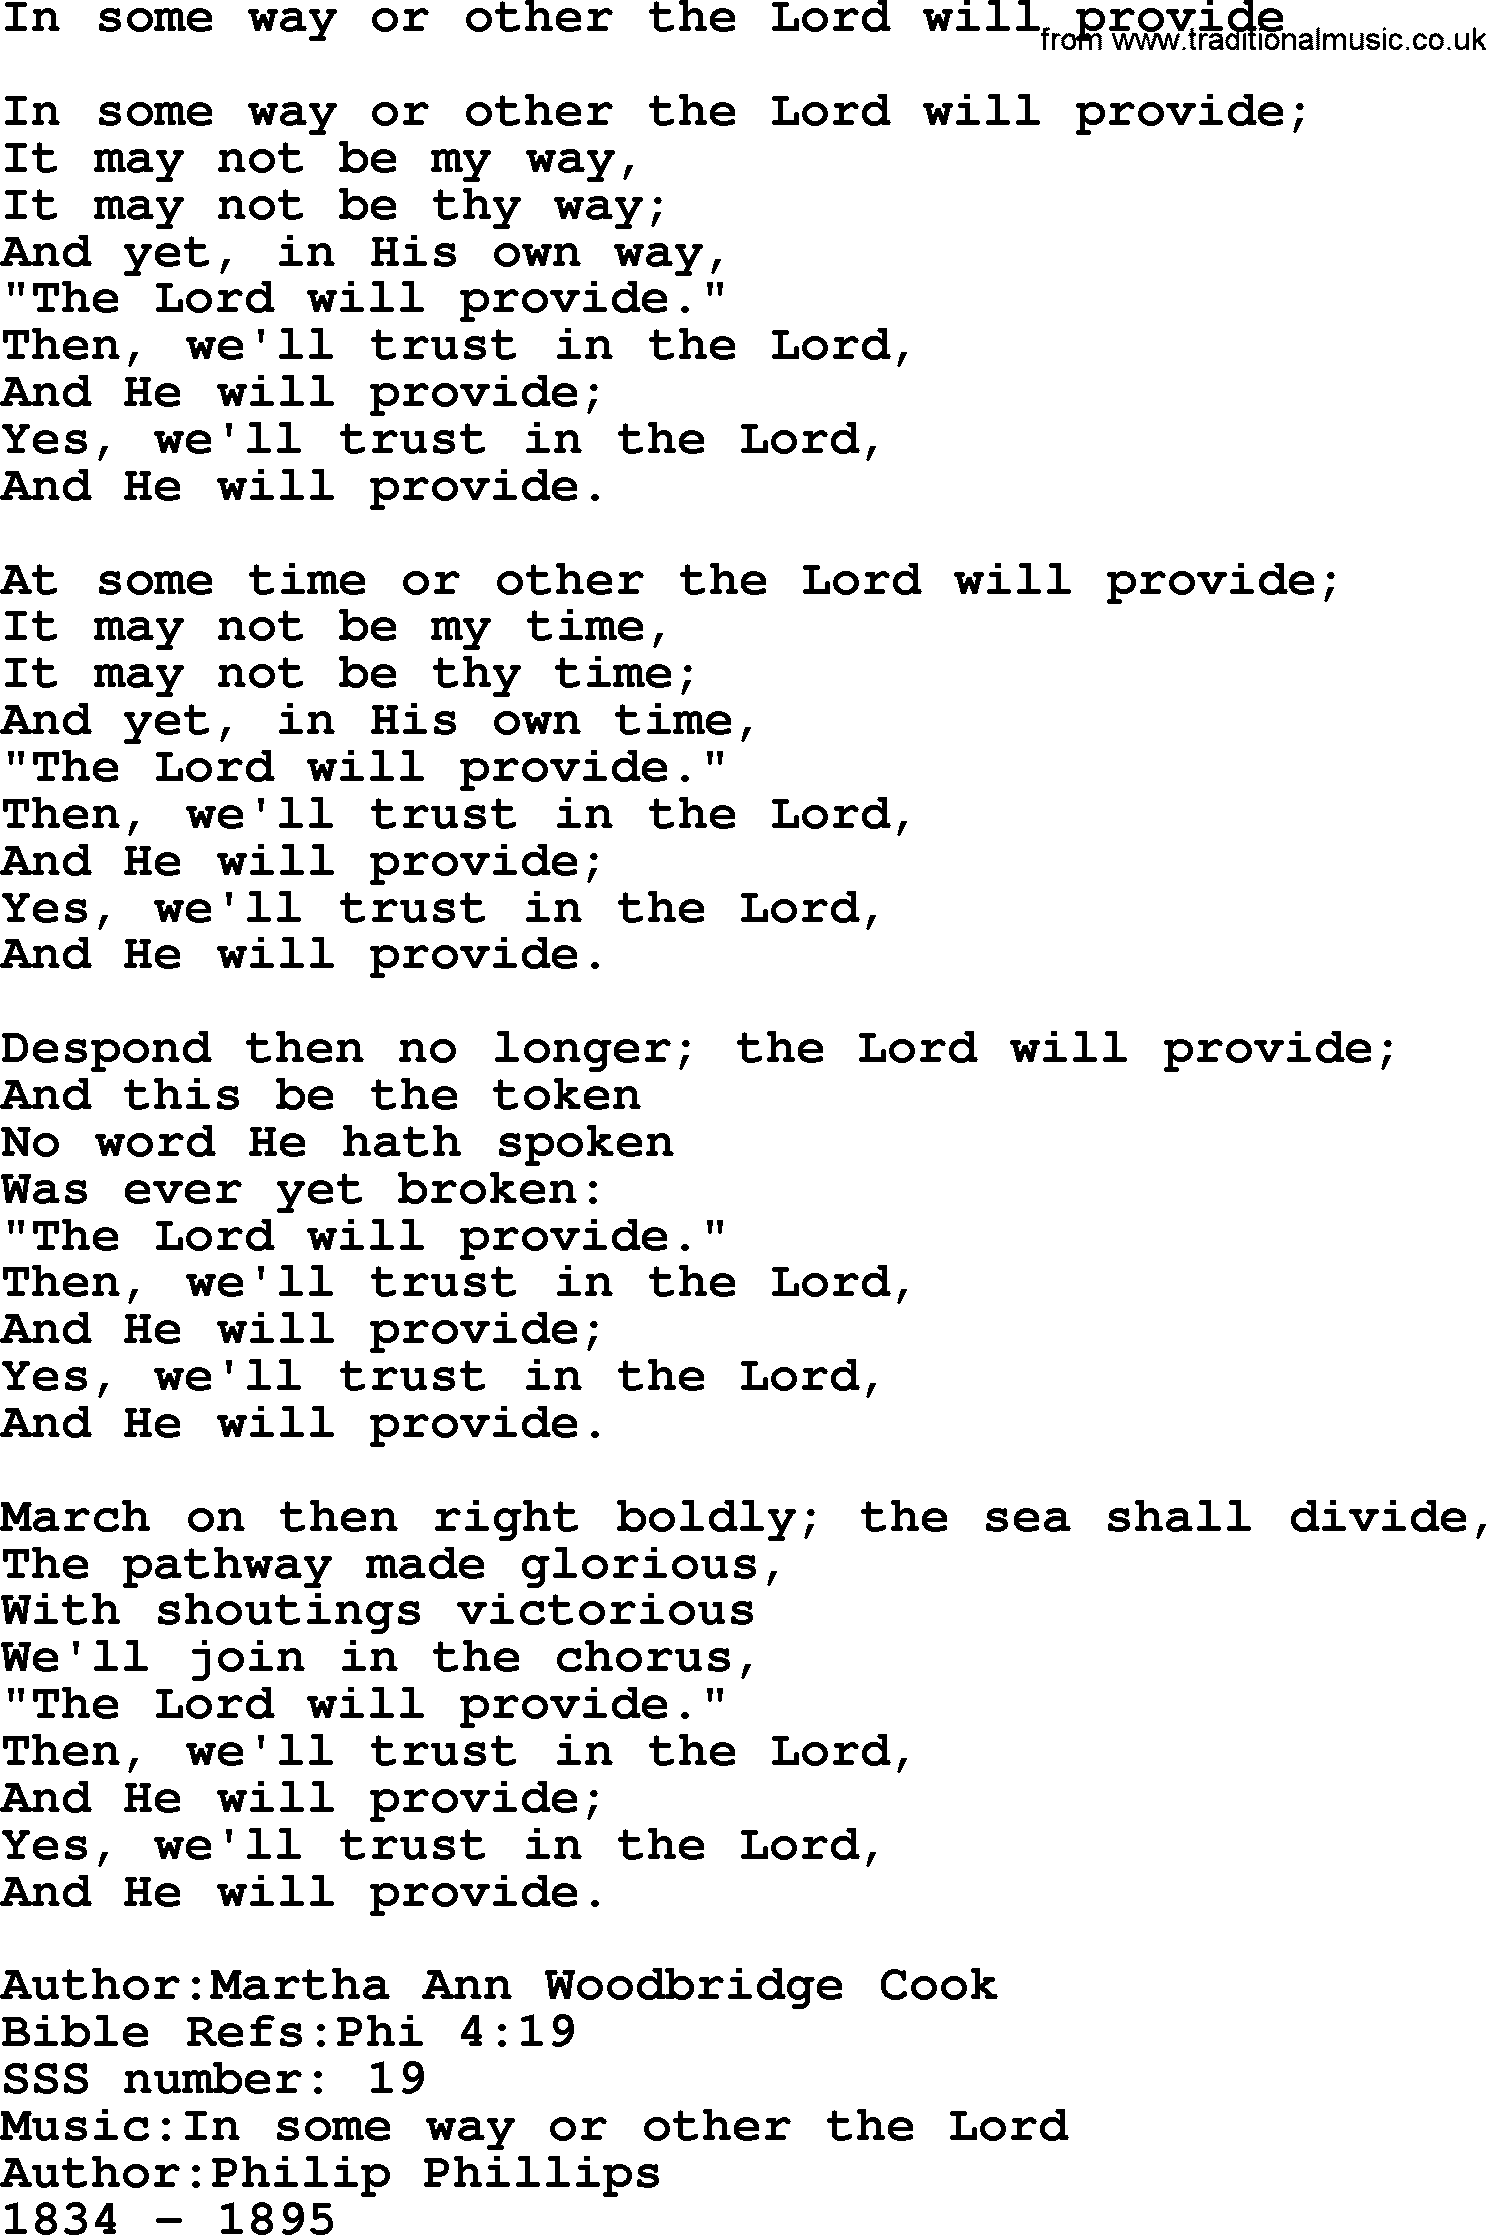 Sacred Songs and Solos complete, 1200 Hymns, title: In Some Way Or Other The Lord Will Provide, lyrics and PDF